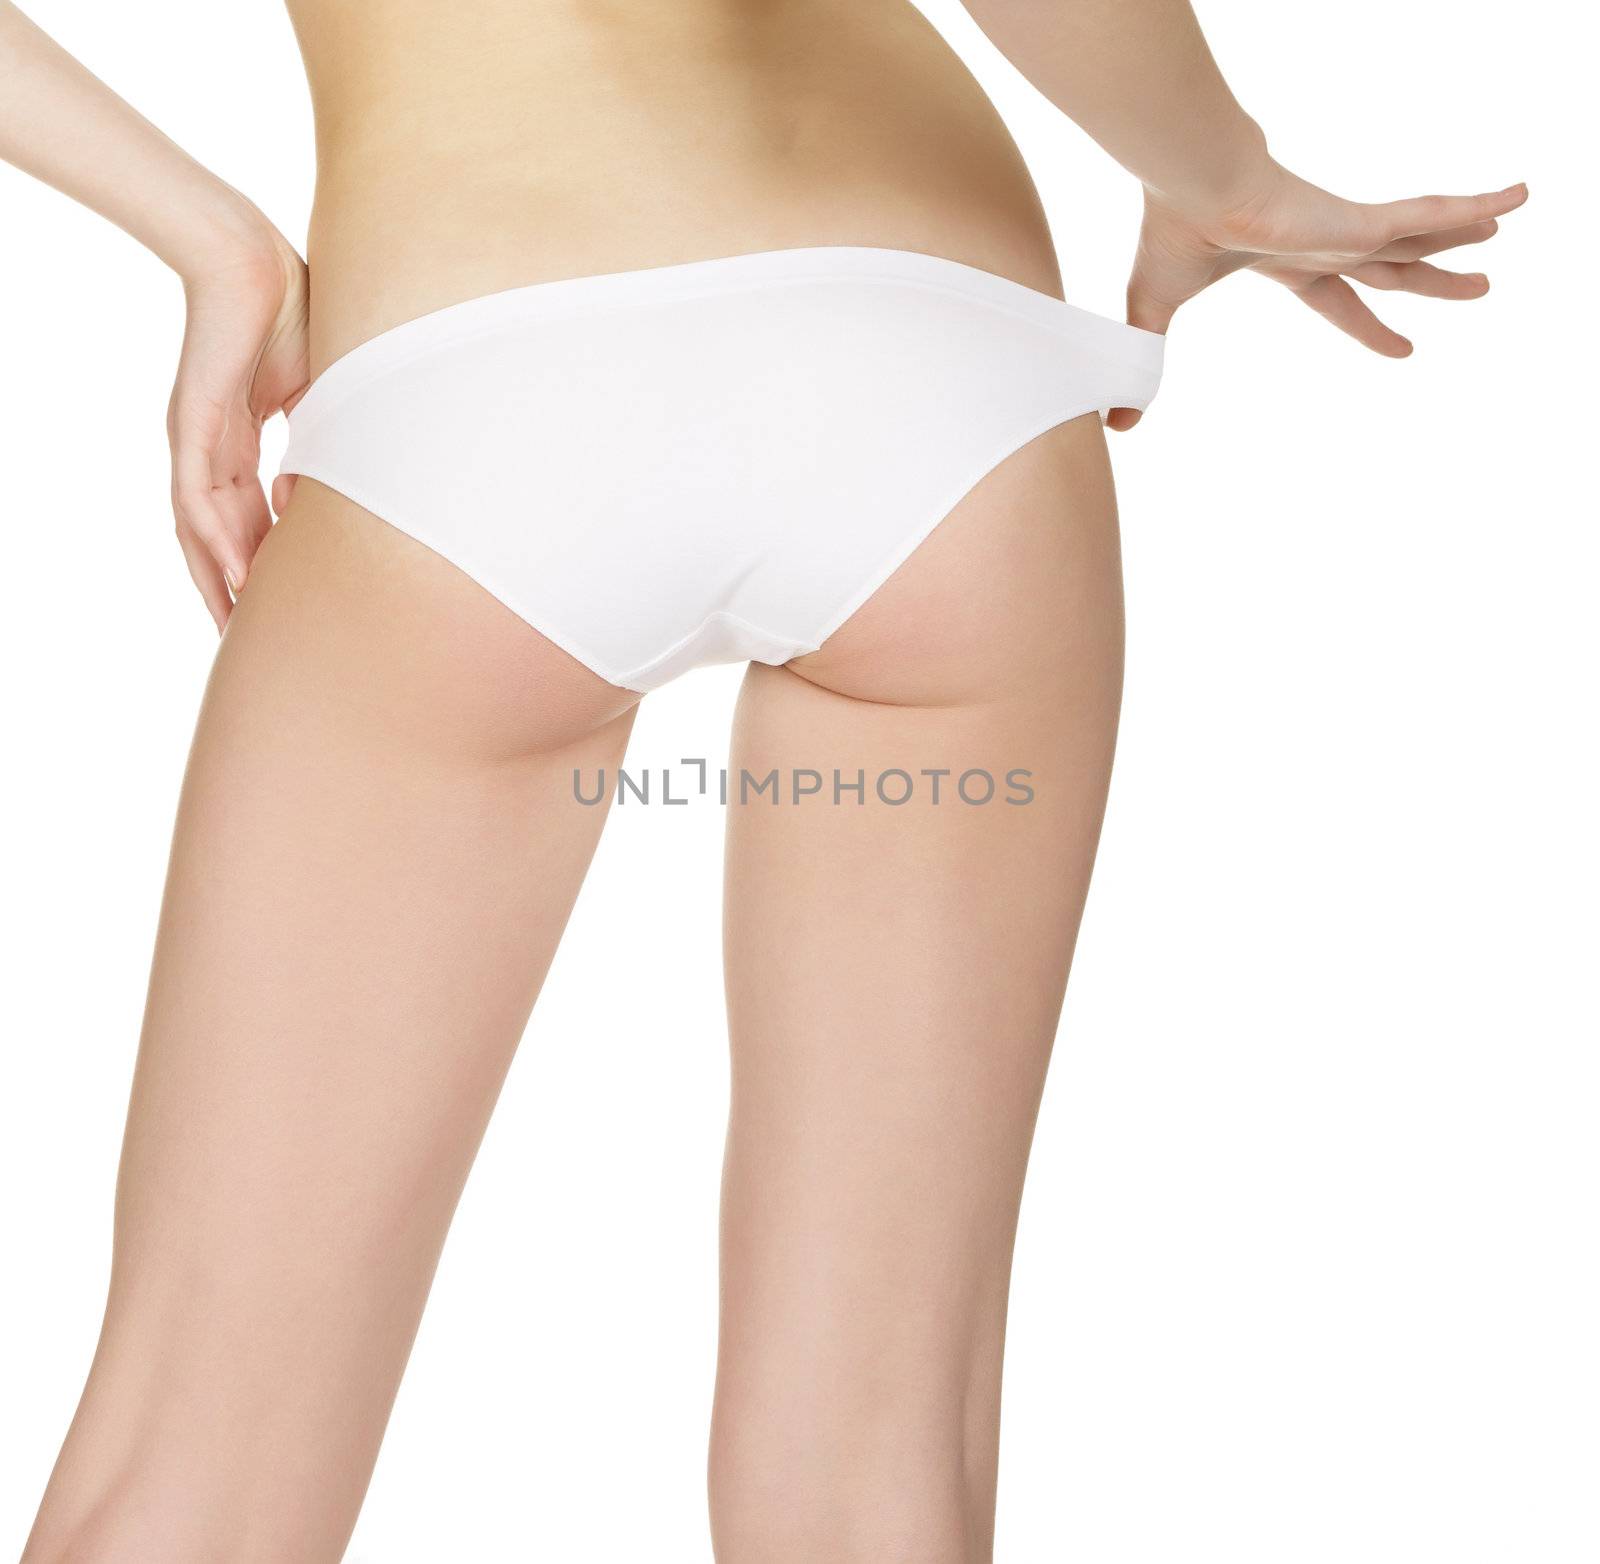 Slim tanned woman's body. Isolated over white background. by Nobilior